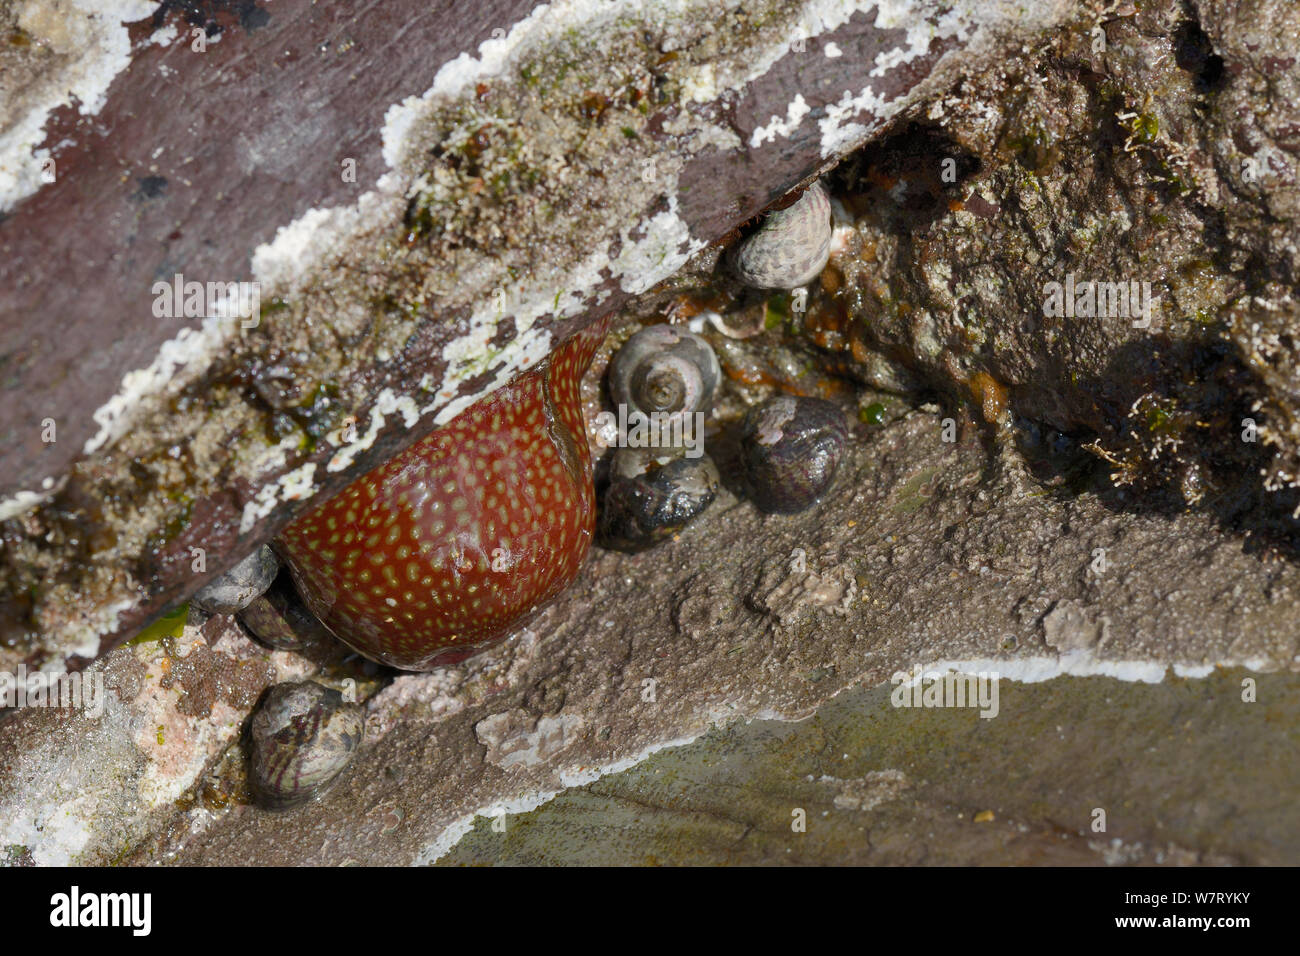 Strawberry anemone (Actinia fragracea) and Flat top shells (Gibbula umbilicalis) attached to rocks exposed at low tide, Cornwall, UK, April. Stock Photo